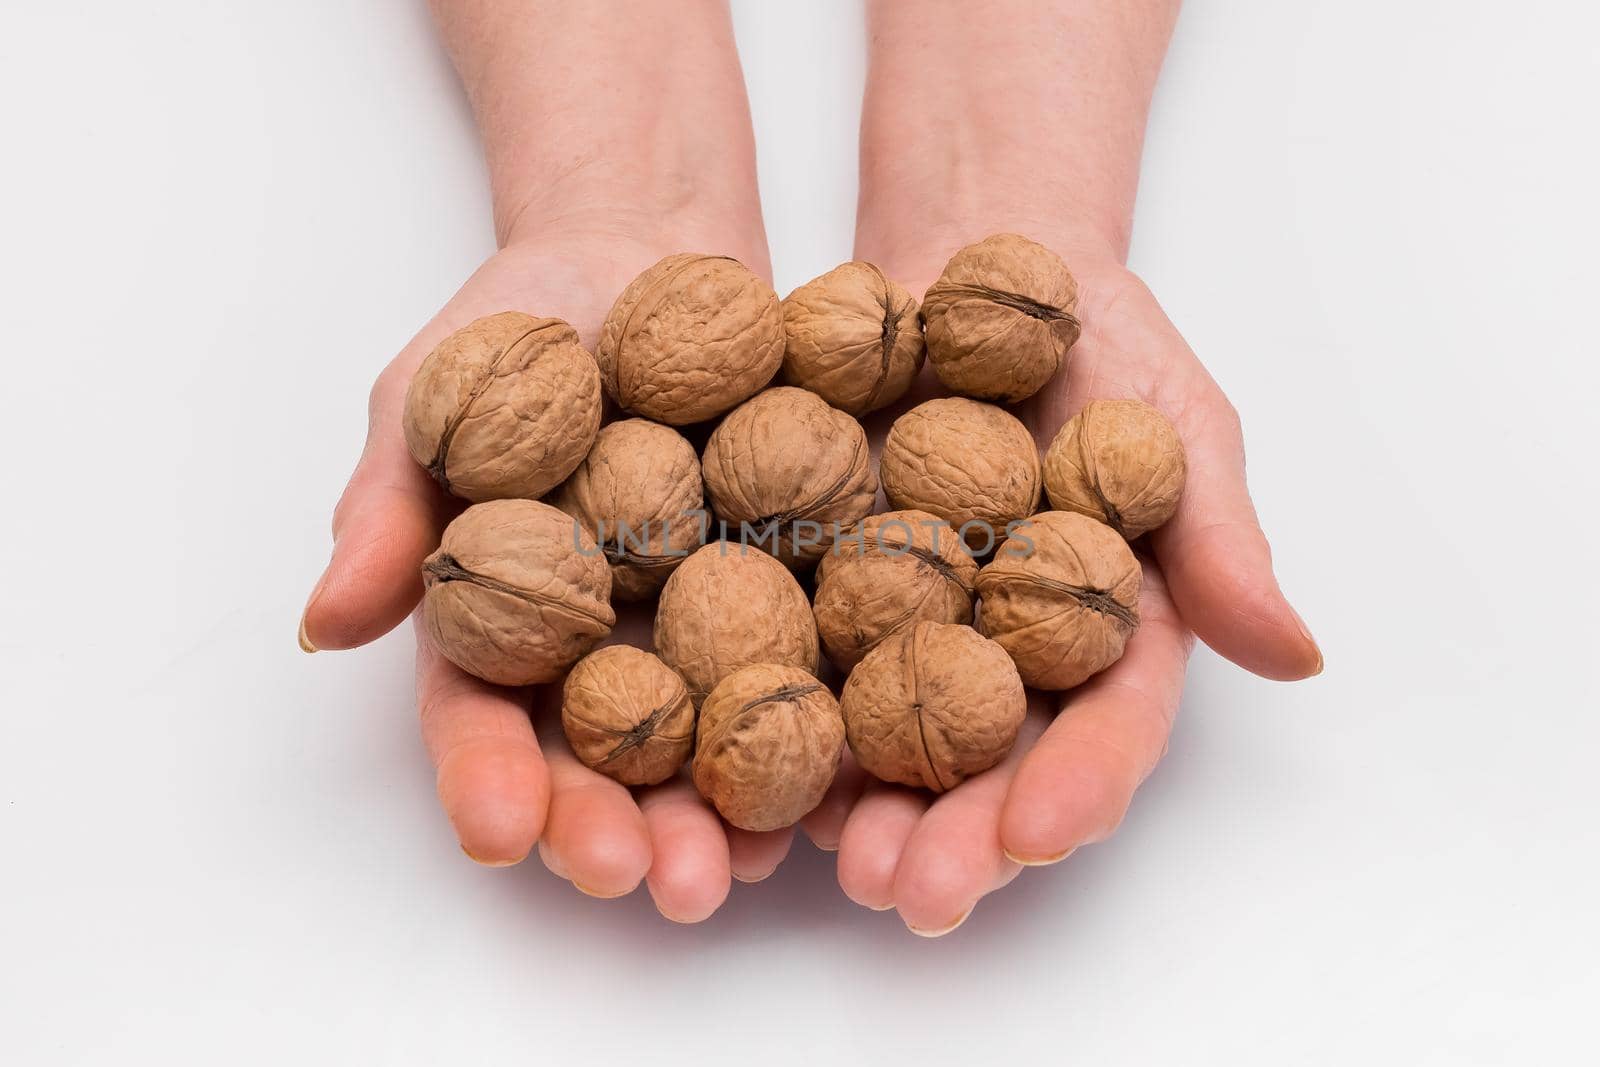 Woman stretches out her hands with a bunch of walnuts on a white background, isolated. Nut concept by AYDO8